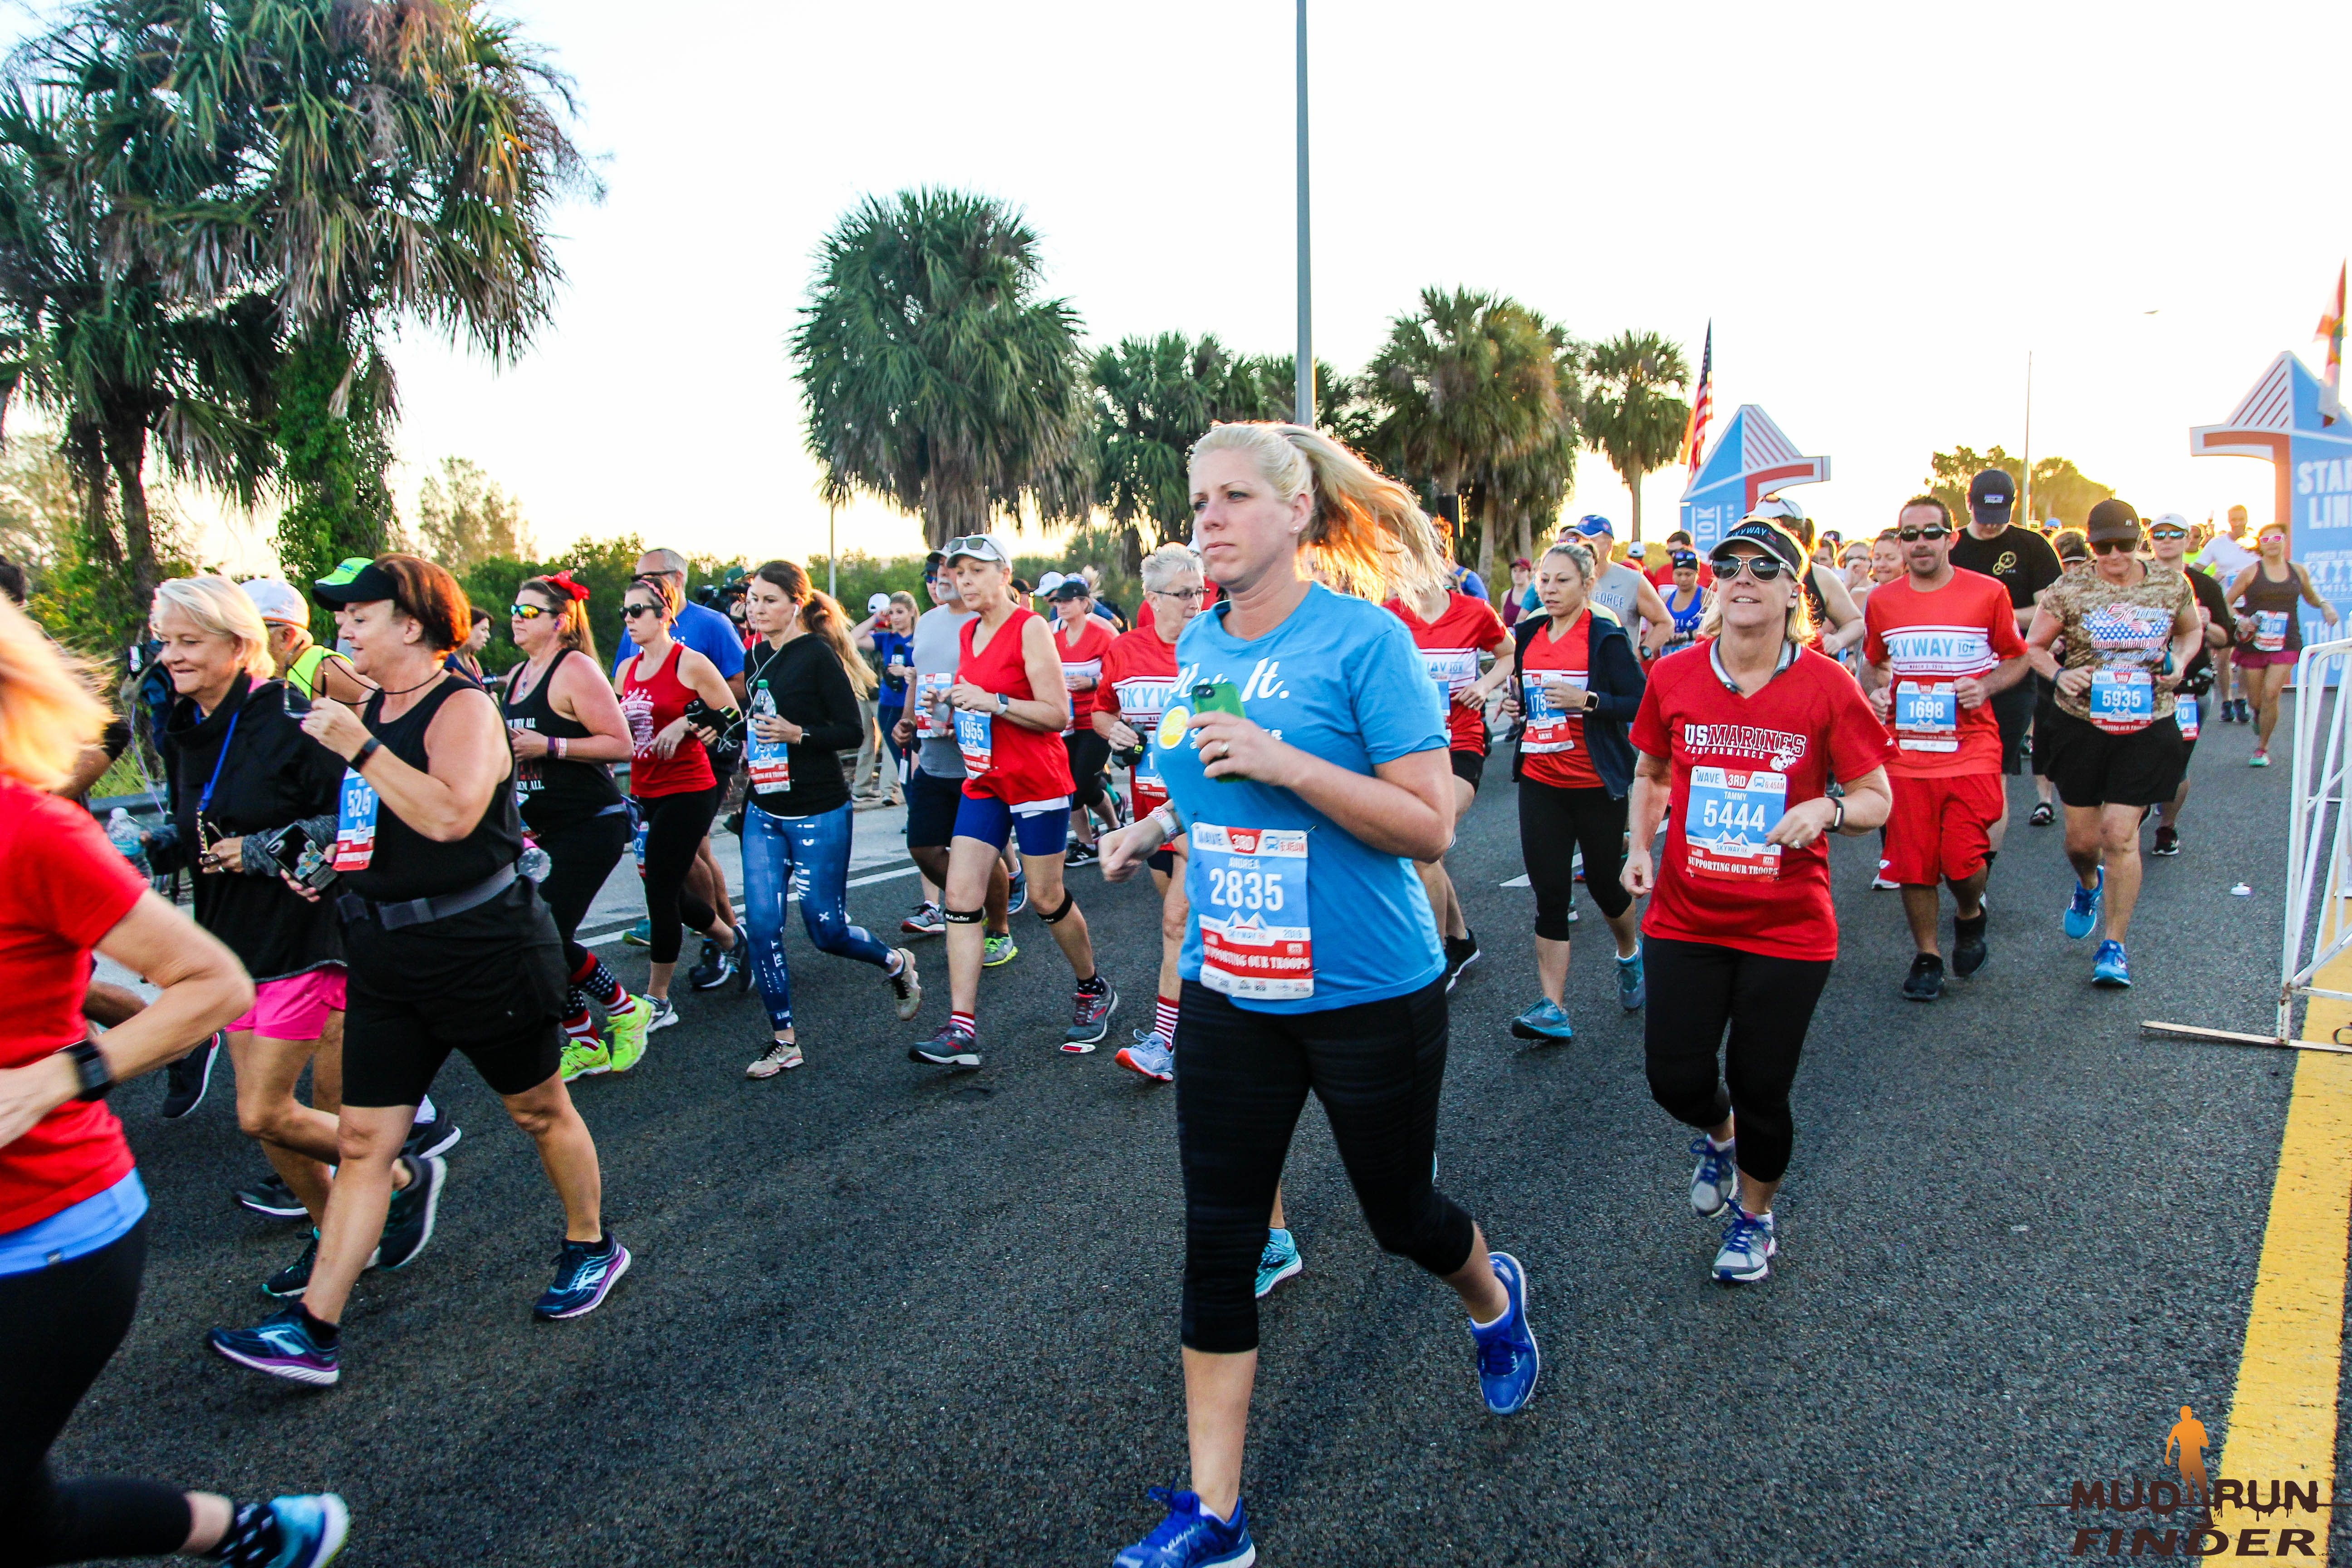 2nd Annual Skyway 10K on March 3rd, 2019 in St. Petersburg, FL | Full album available on MudRunFinder.com